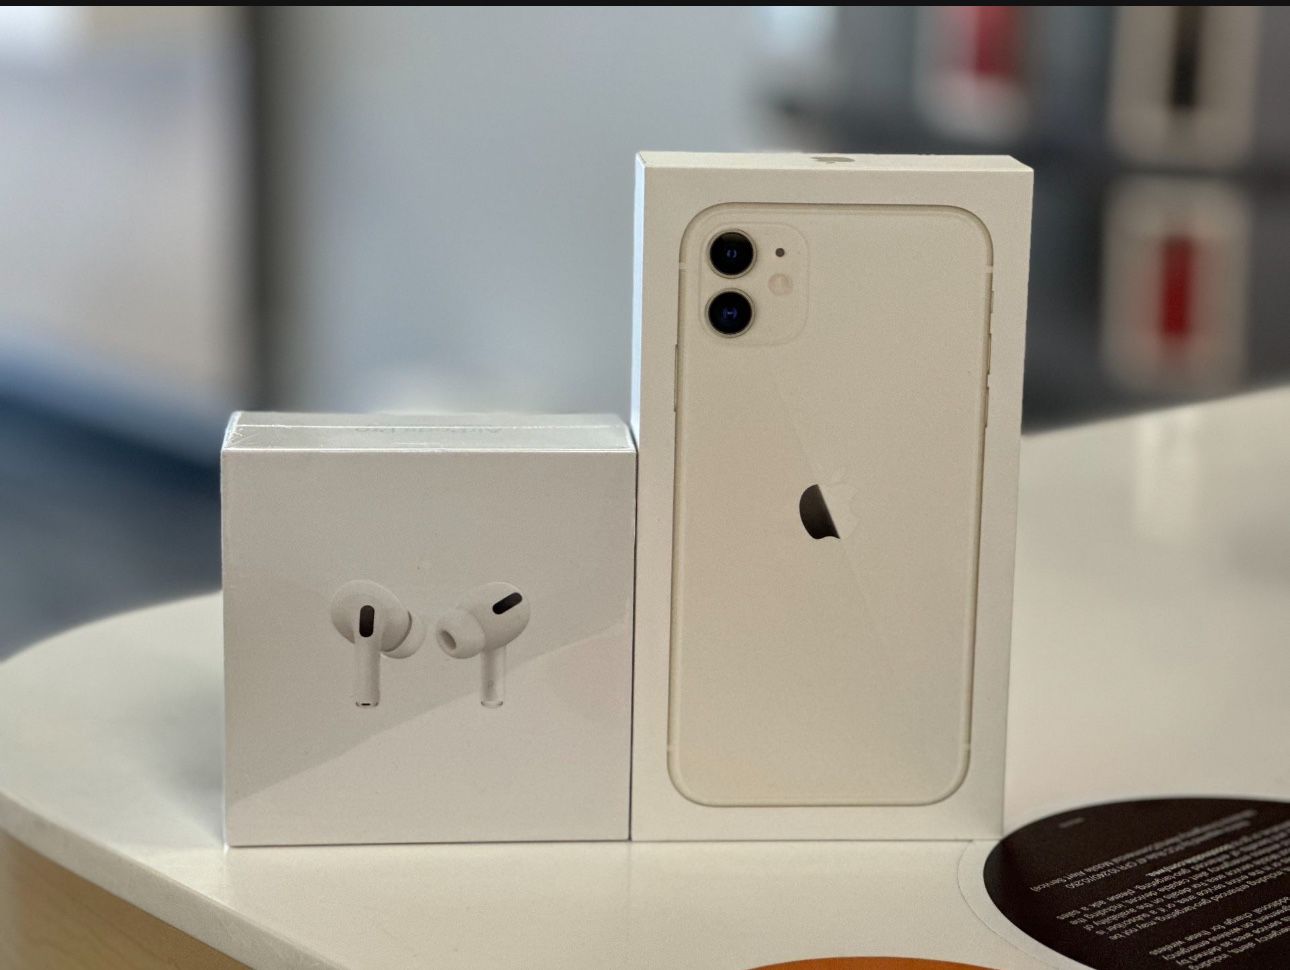 Iphone11 brand new sealed pack with airpod